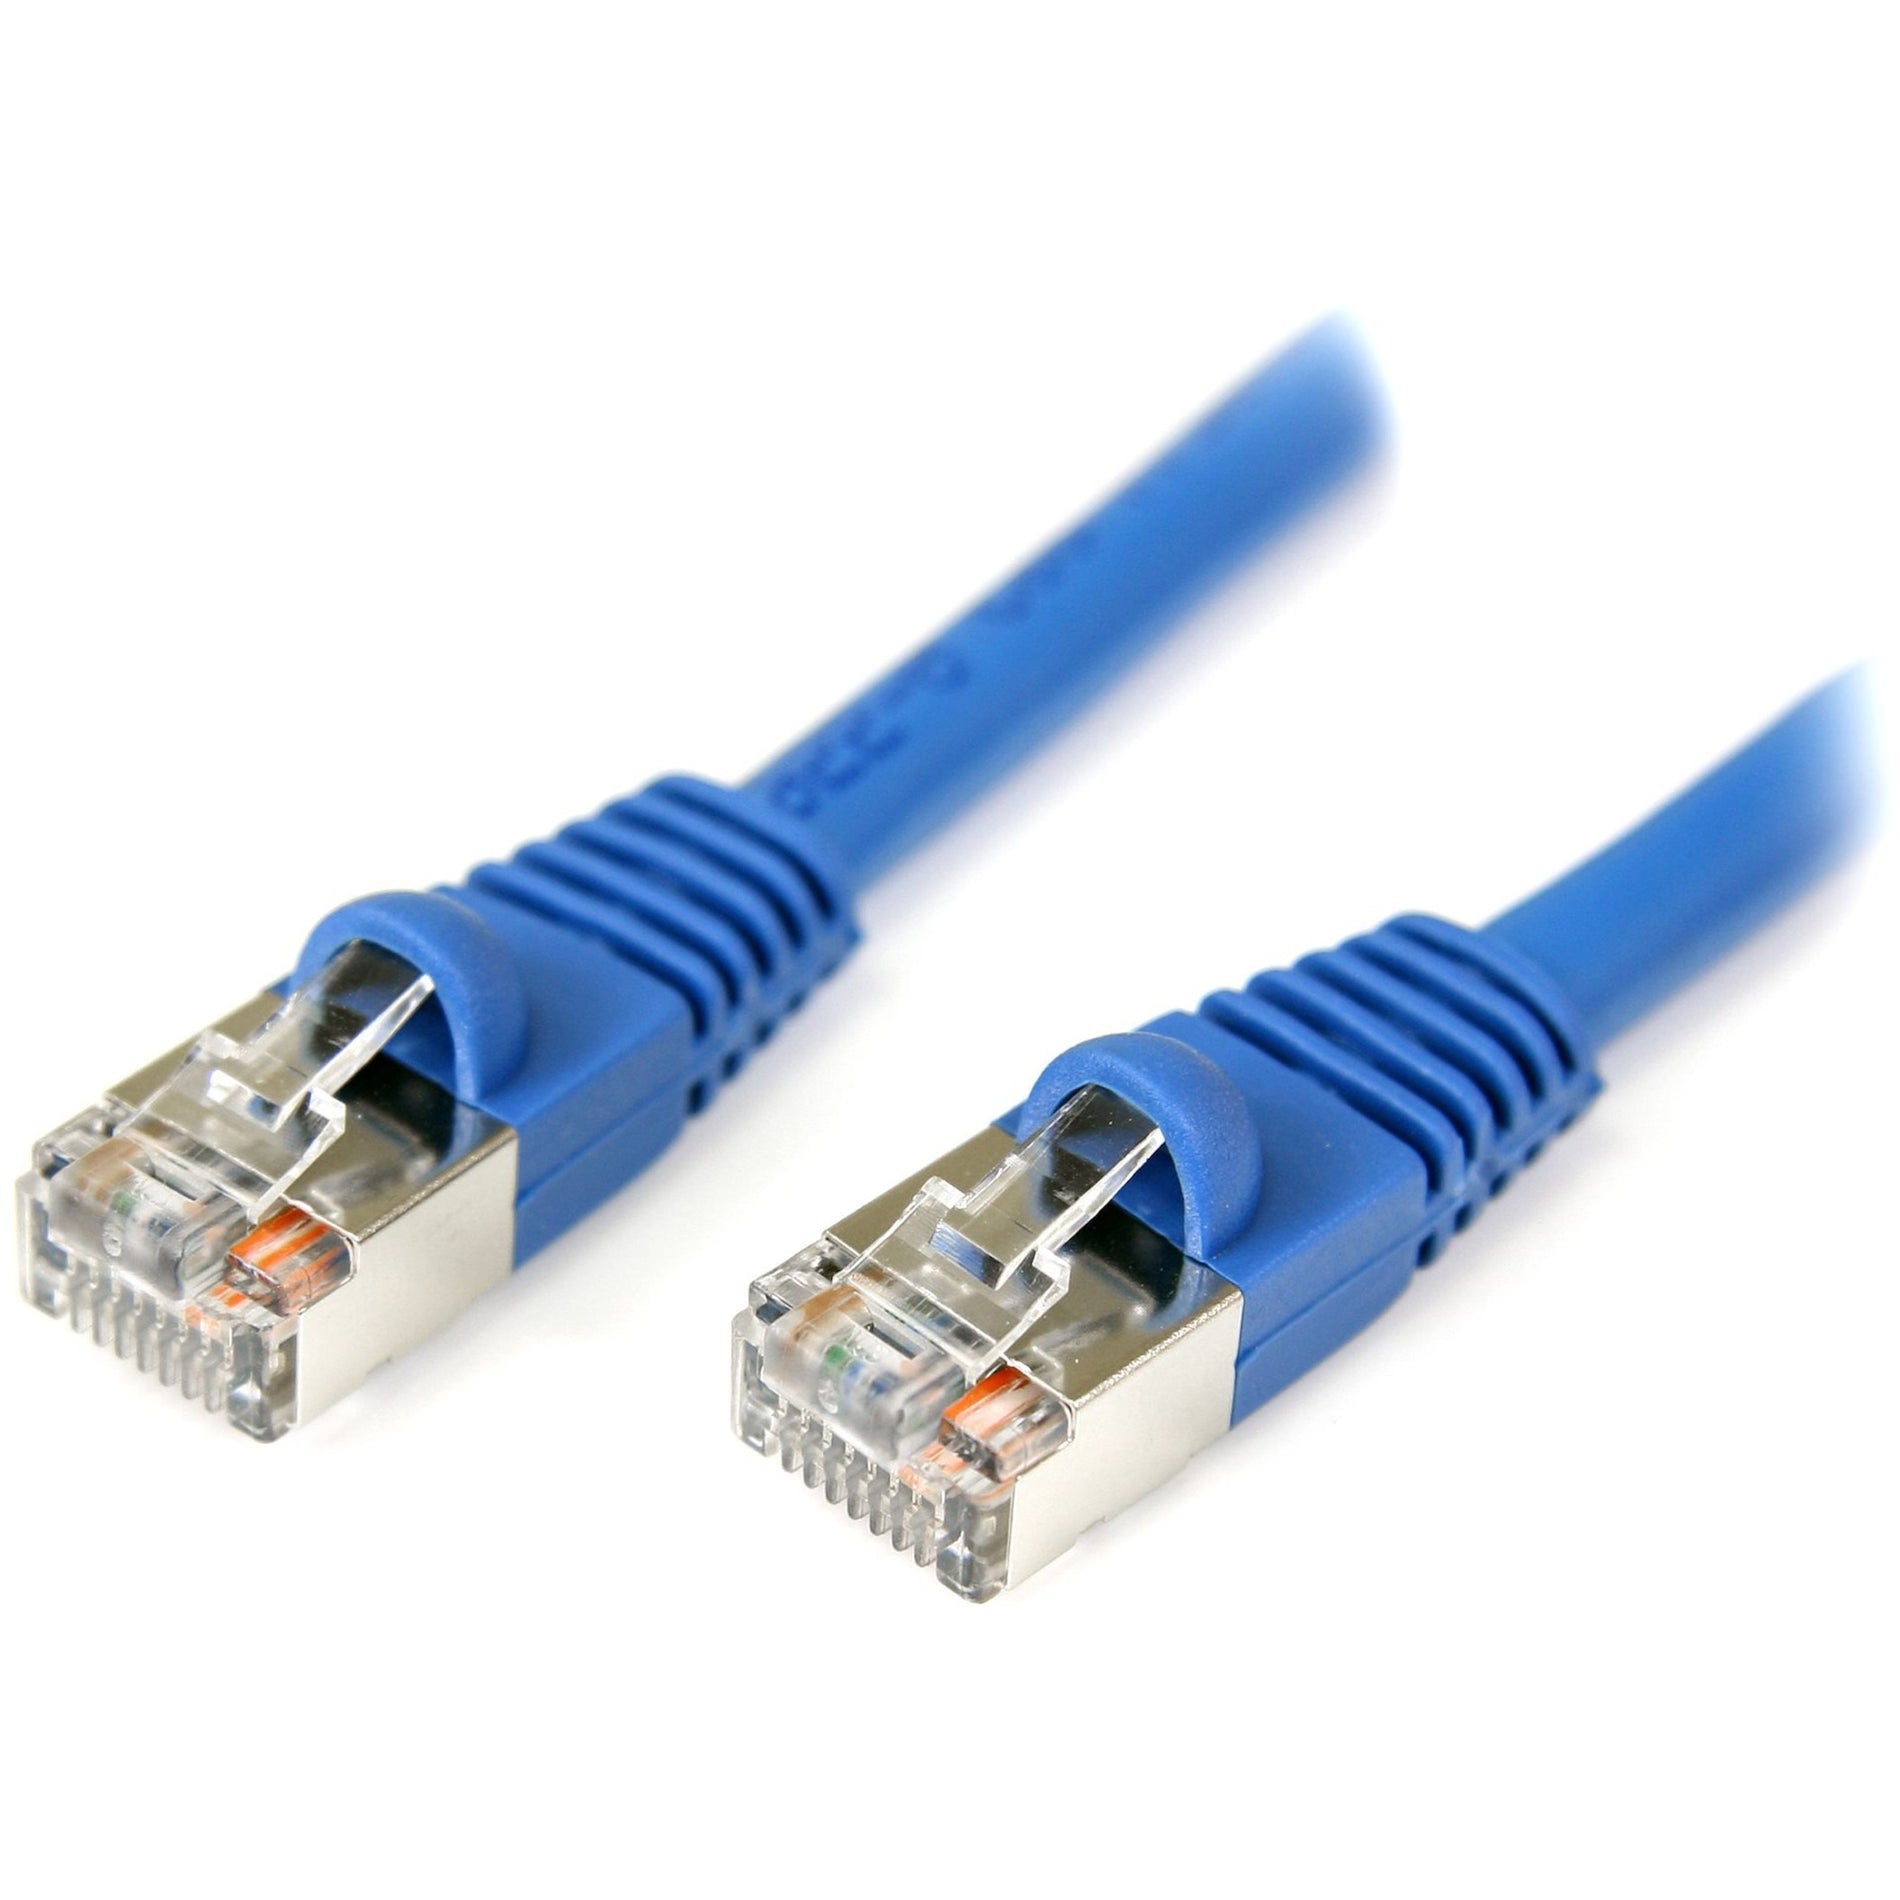 StarTech.com S45PATCH75BL 75 ft Blue Snagless Shielded Cat 5e Patch Cable, Flexible and EMI/RF Protected